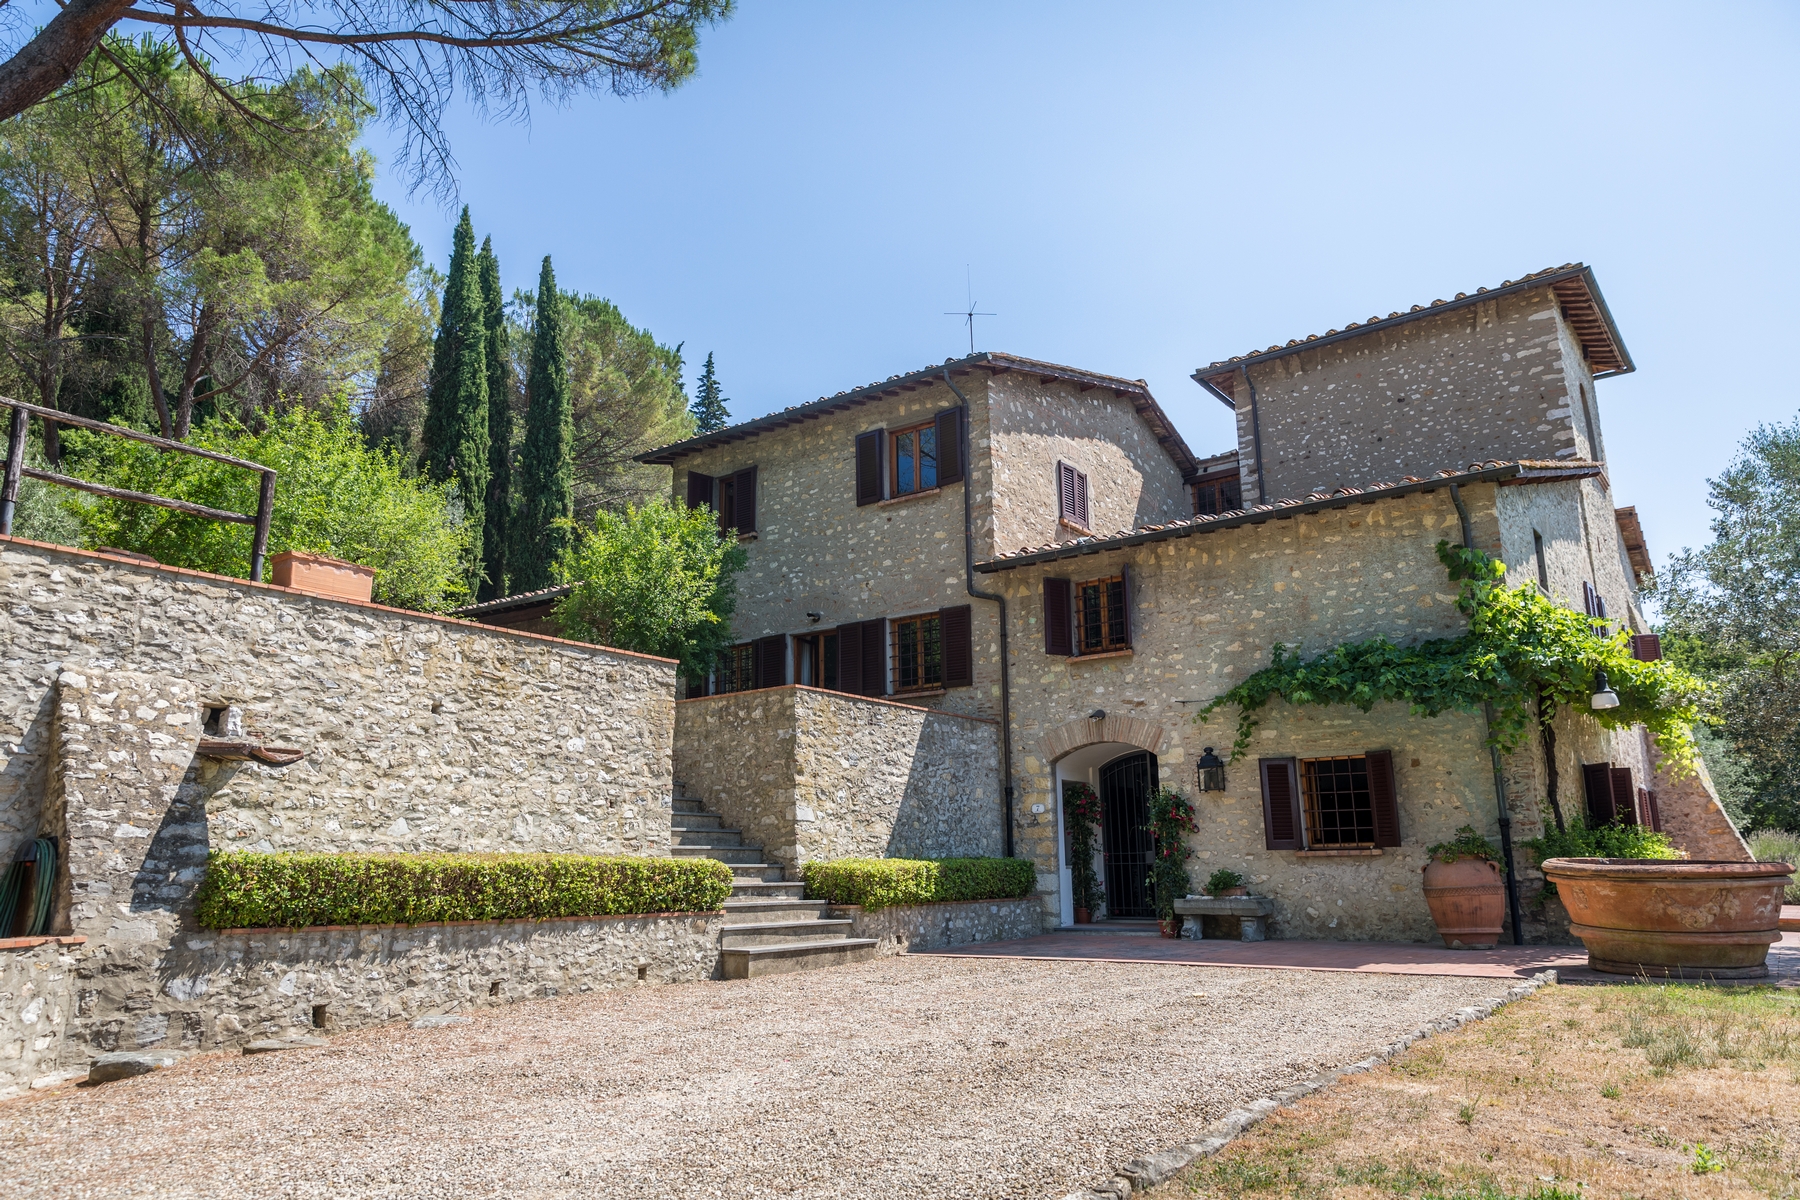 Wonderful farmhouse in the countryside near Florence